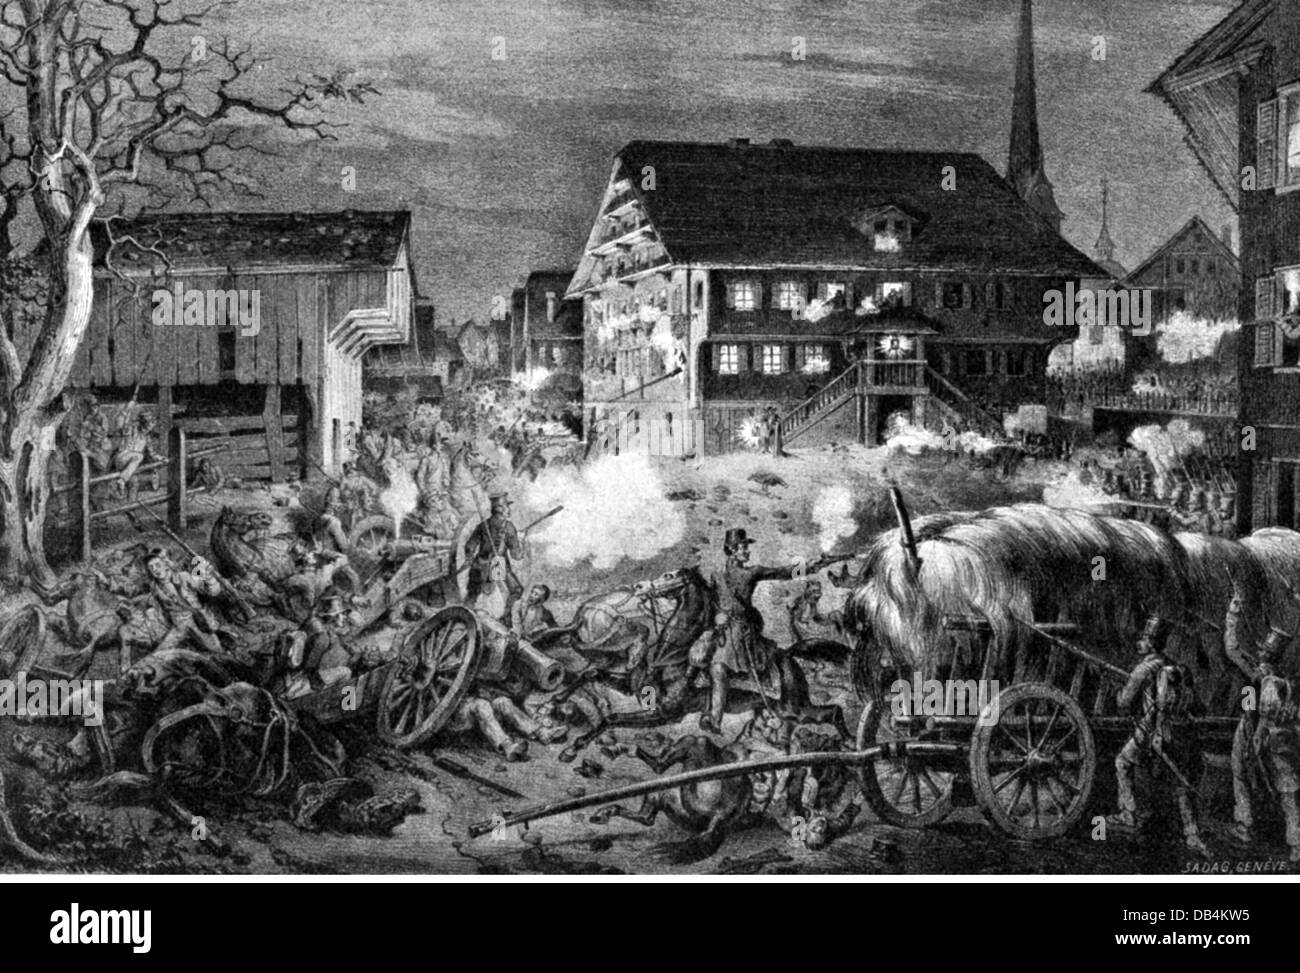 Freischar Raids in Switzerland 1844 - 1845, Battle of Malters, 1.4.1845, defeat of the Freischars against troops from Luzern, contemporary lithograph, Eglin Brothers, Luzern, combat, civil war, liberal uprising, anti-clergical, solidiers, military, 19th century, historic, historical, people, Additional-Rights-Clearences-Not Available Stock Photo